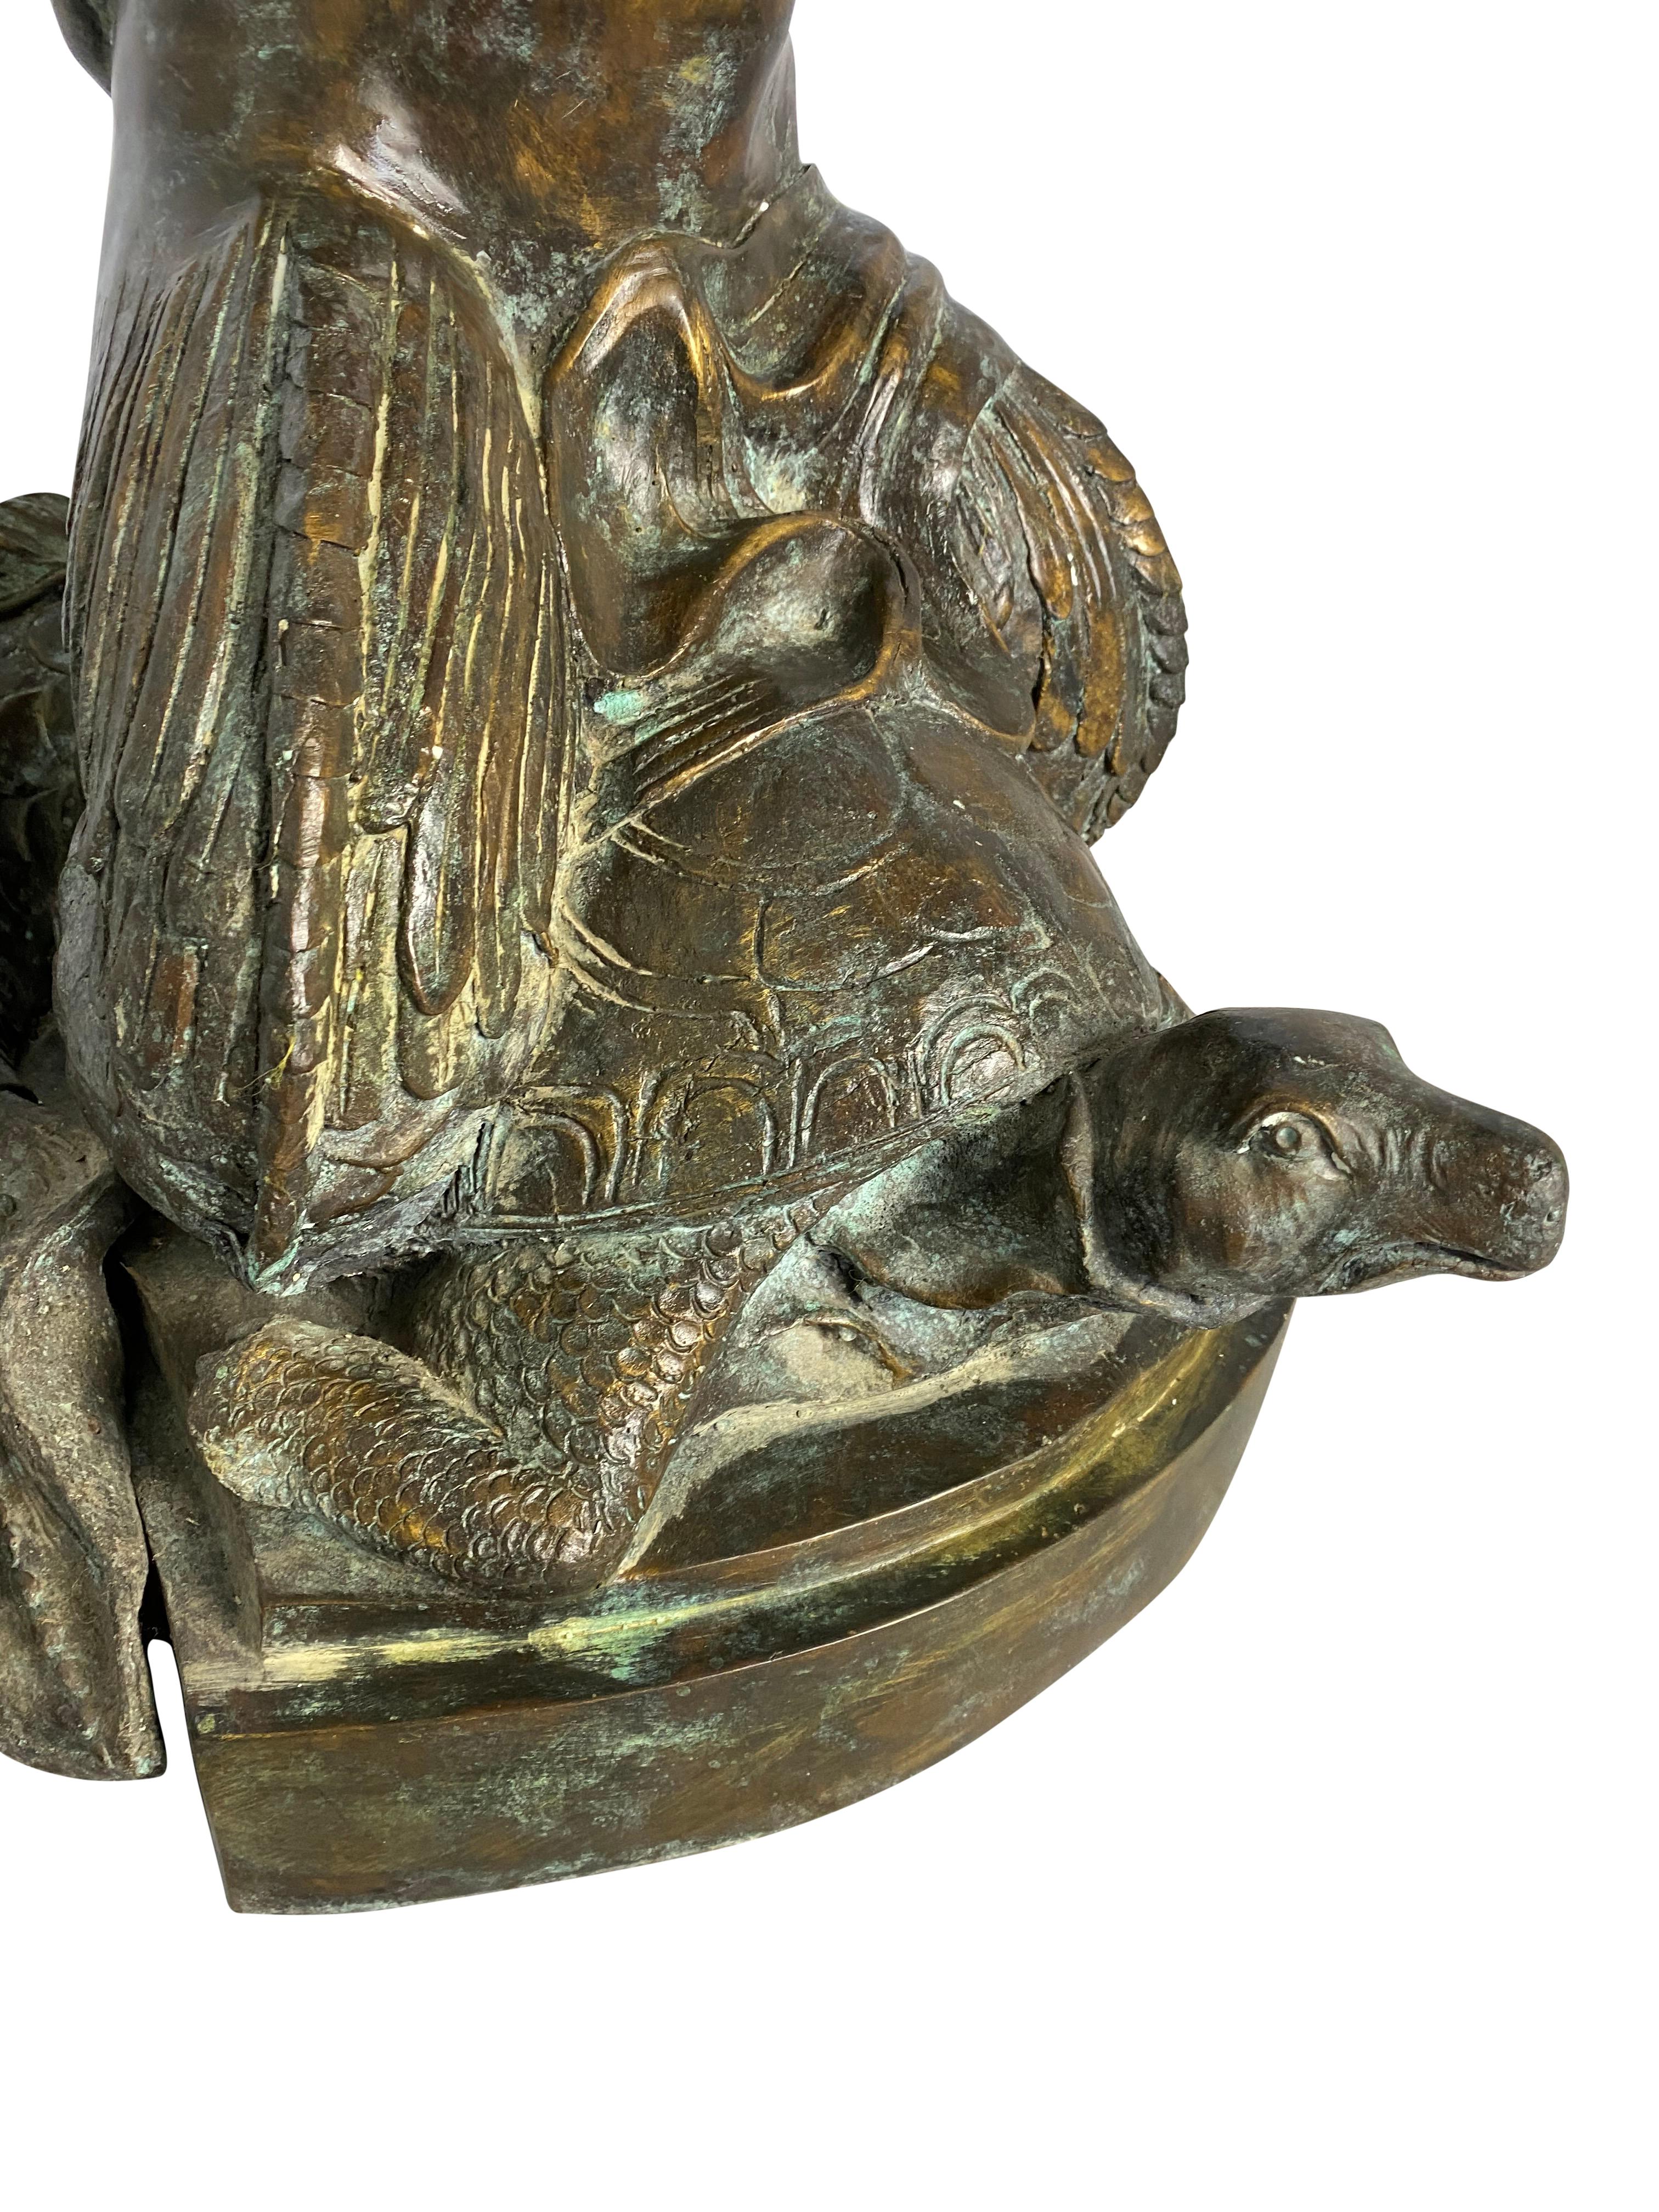 Cast Fountain of Bronze Mermaid Seated on Tortoise, 20th Century For Sale